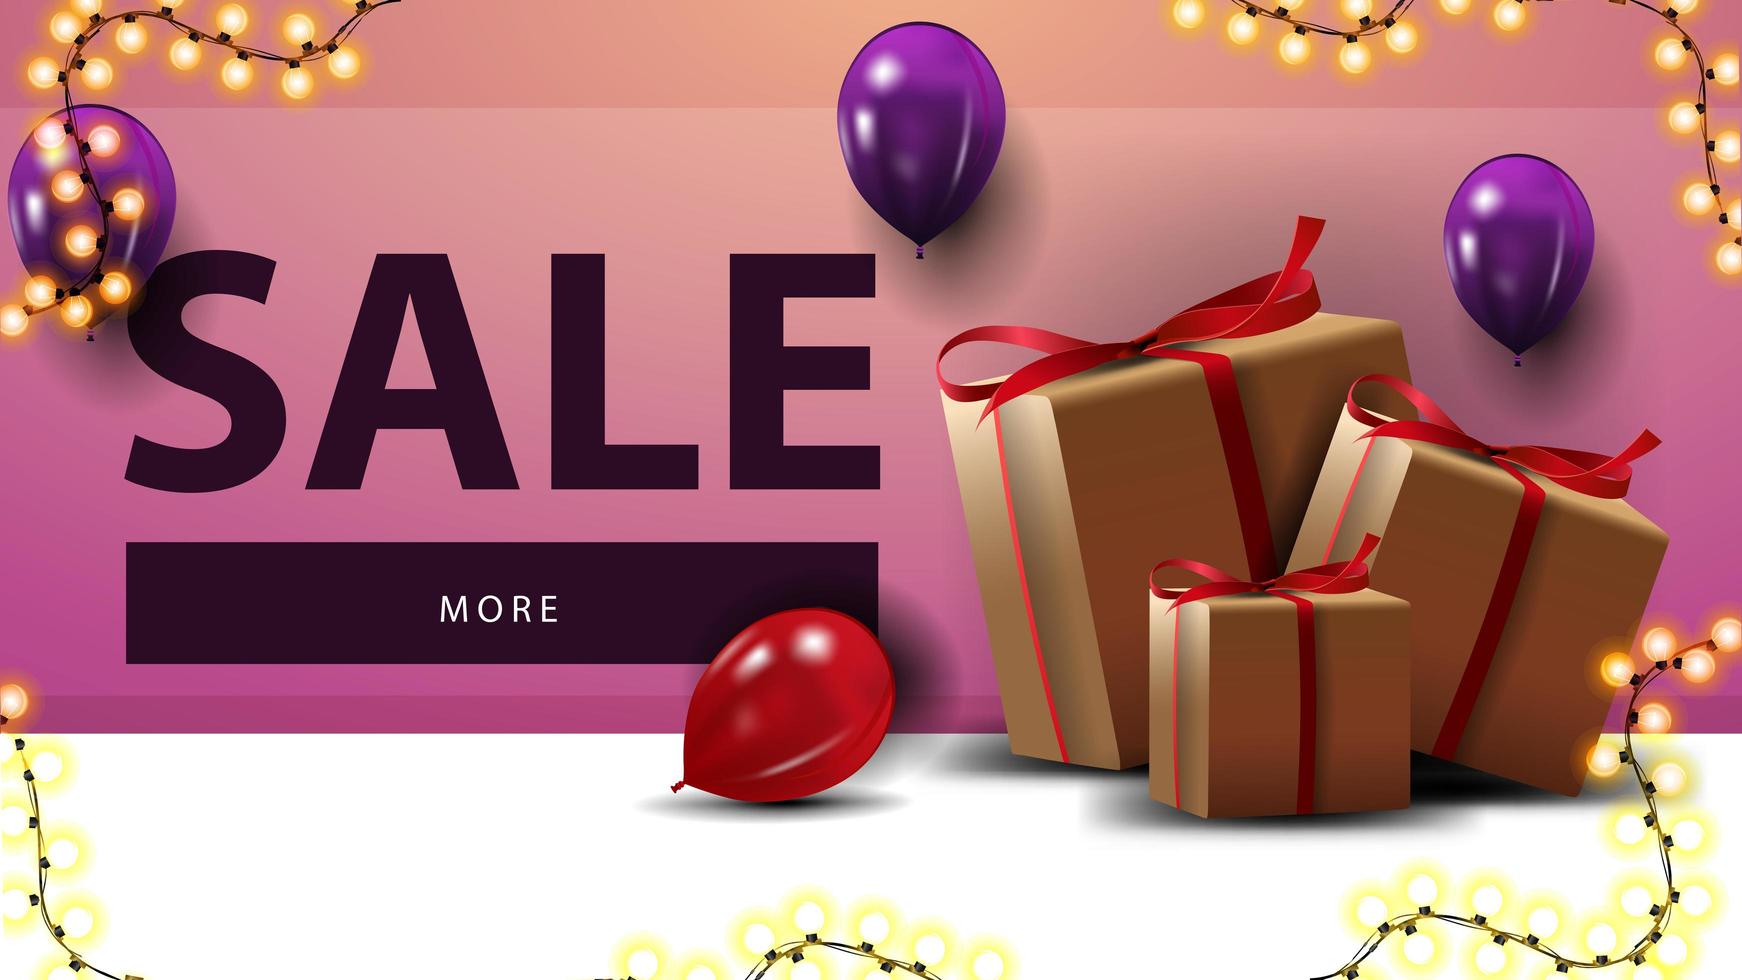 Sale, pink discount banner for website with gift boxes and balloons vector